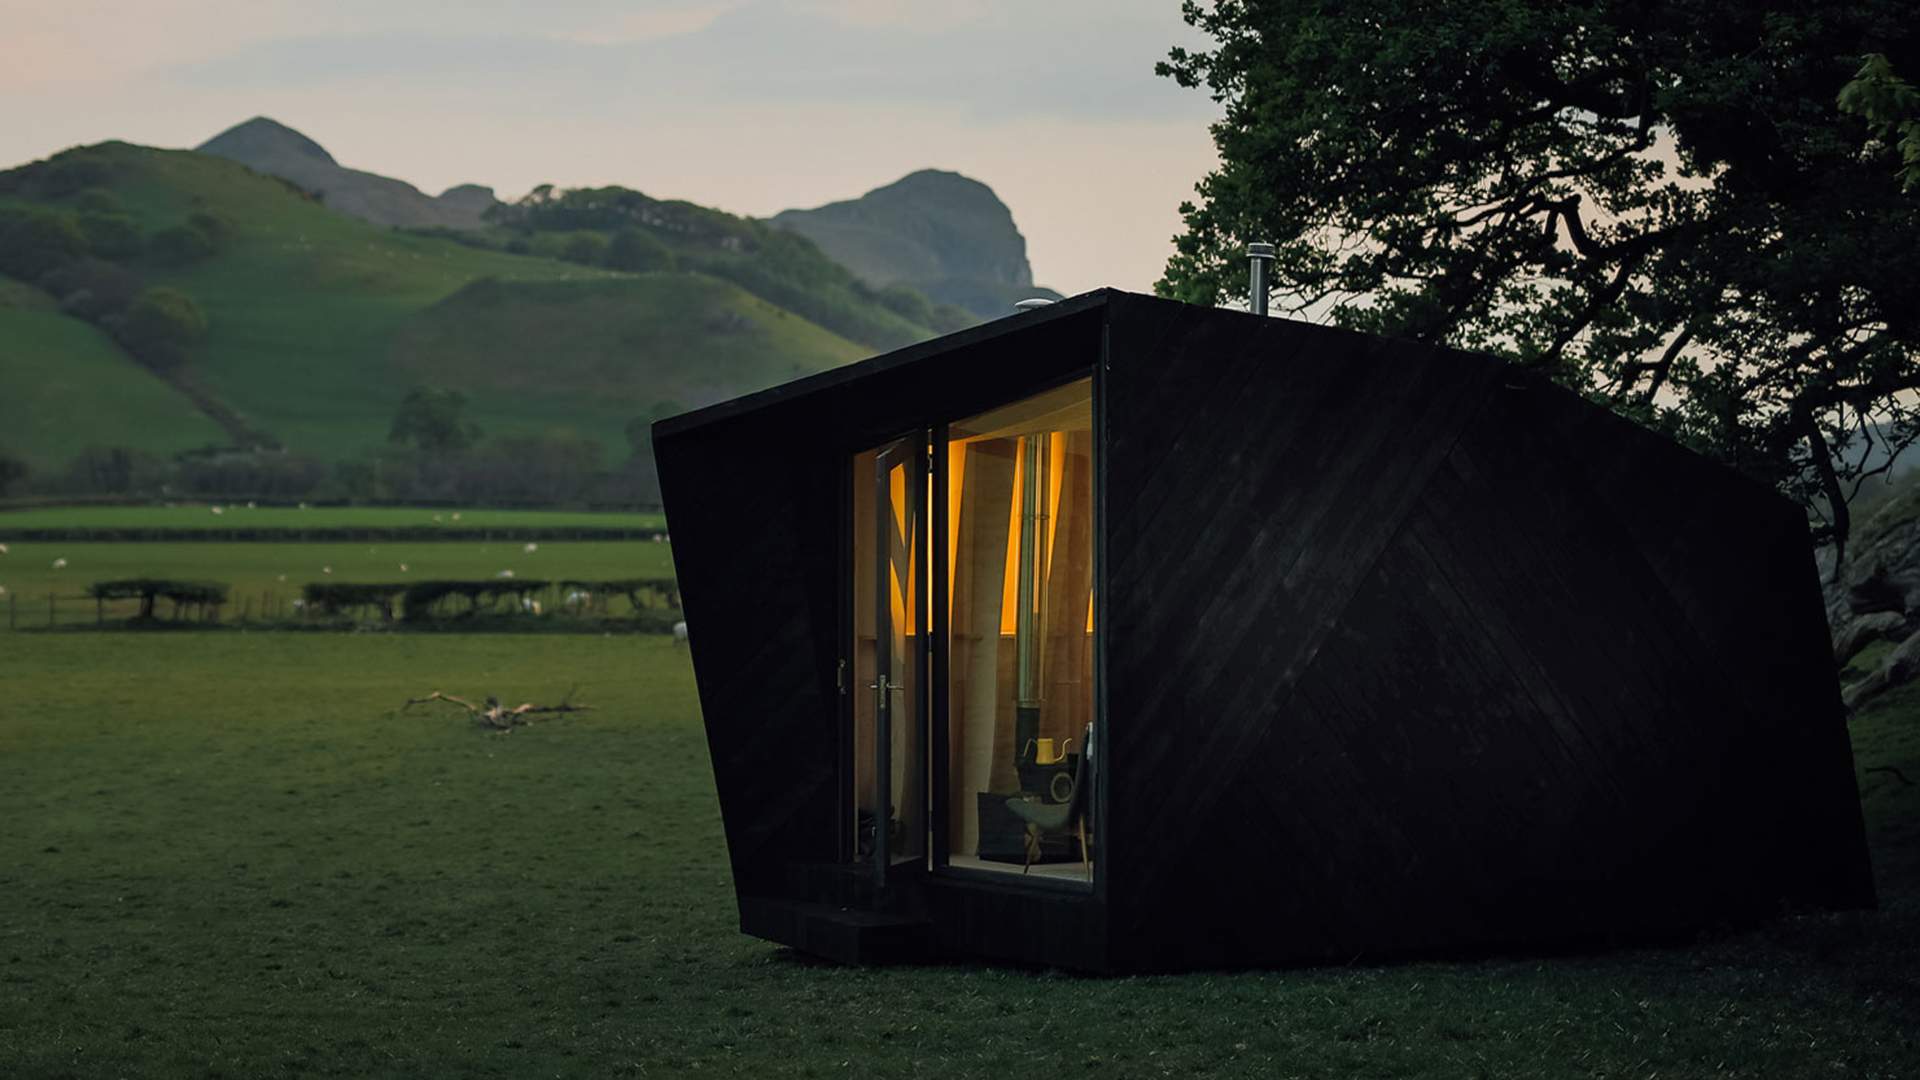 You Can Now Stay In a King Arthur-Inspired Pop-Up Cabin Hotel